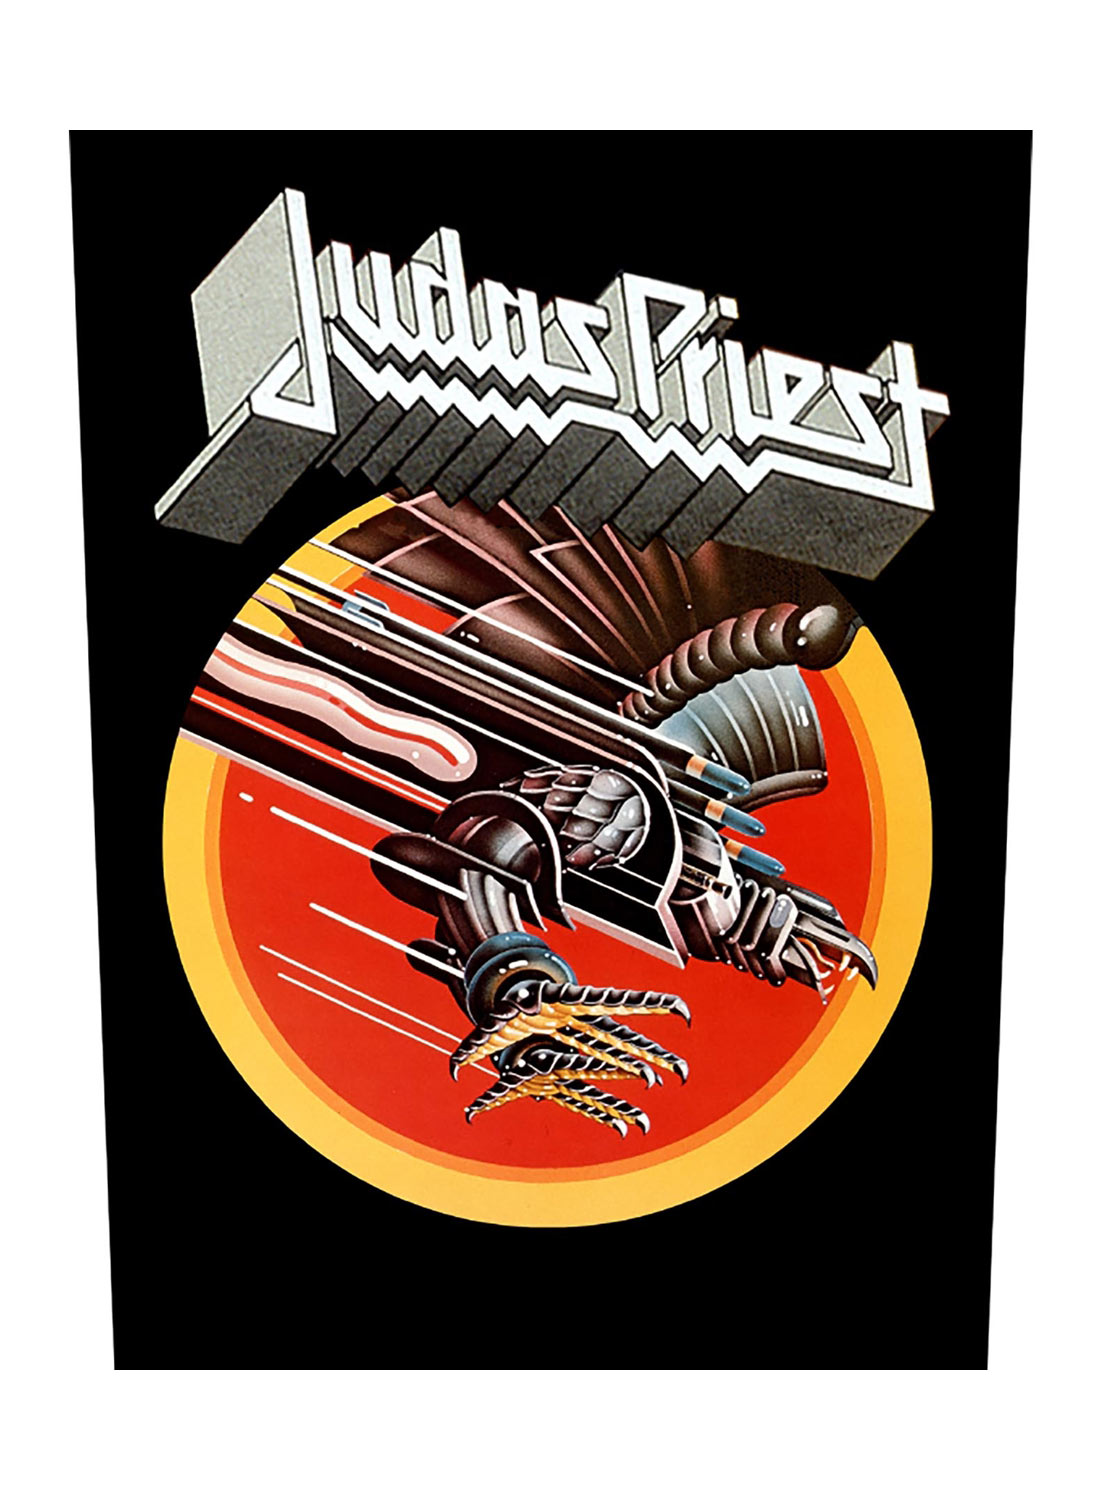 Judas Priest Screaming For Vengeance Back Patch